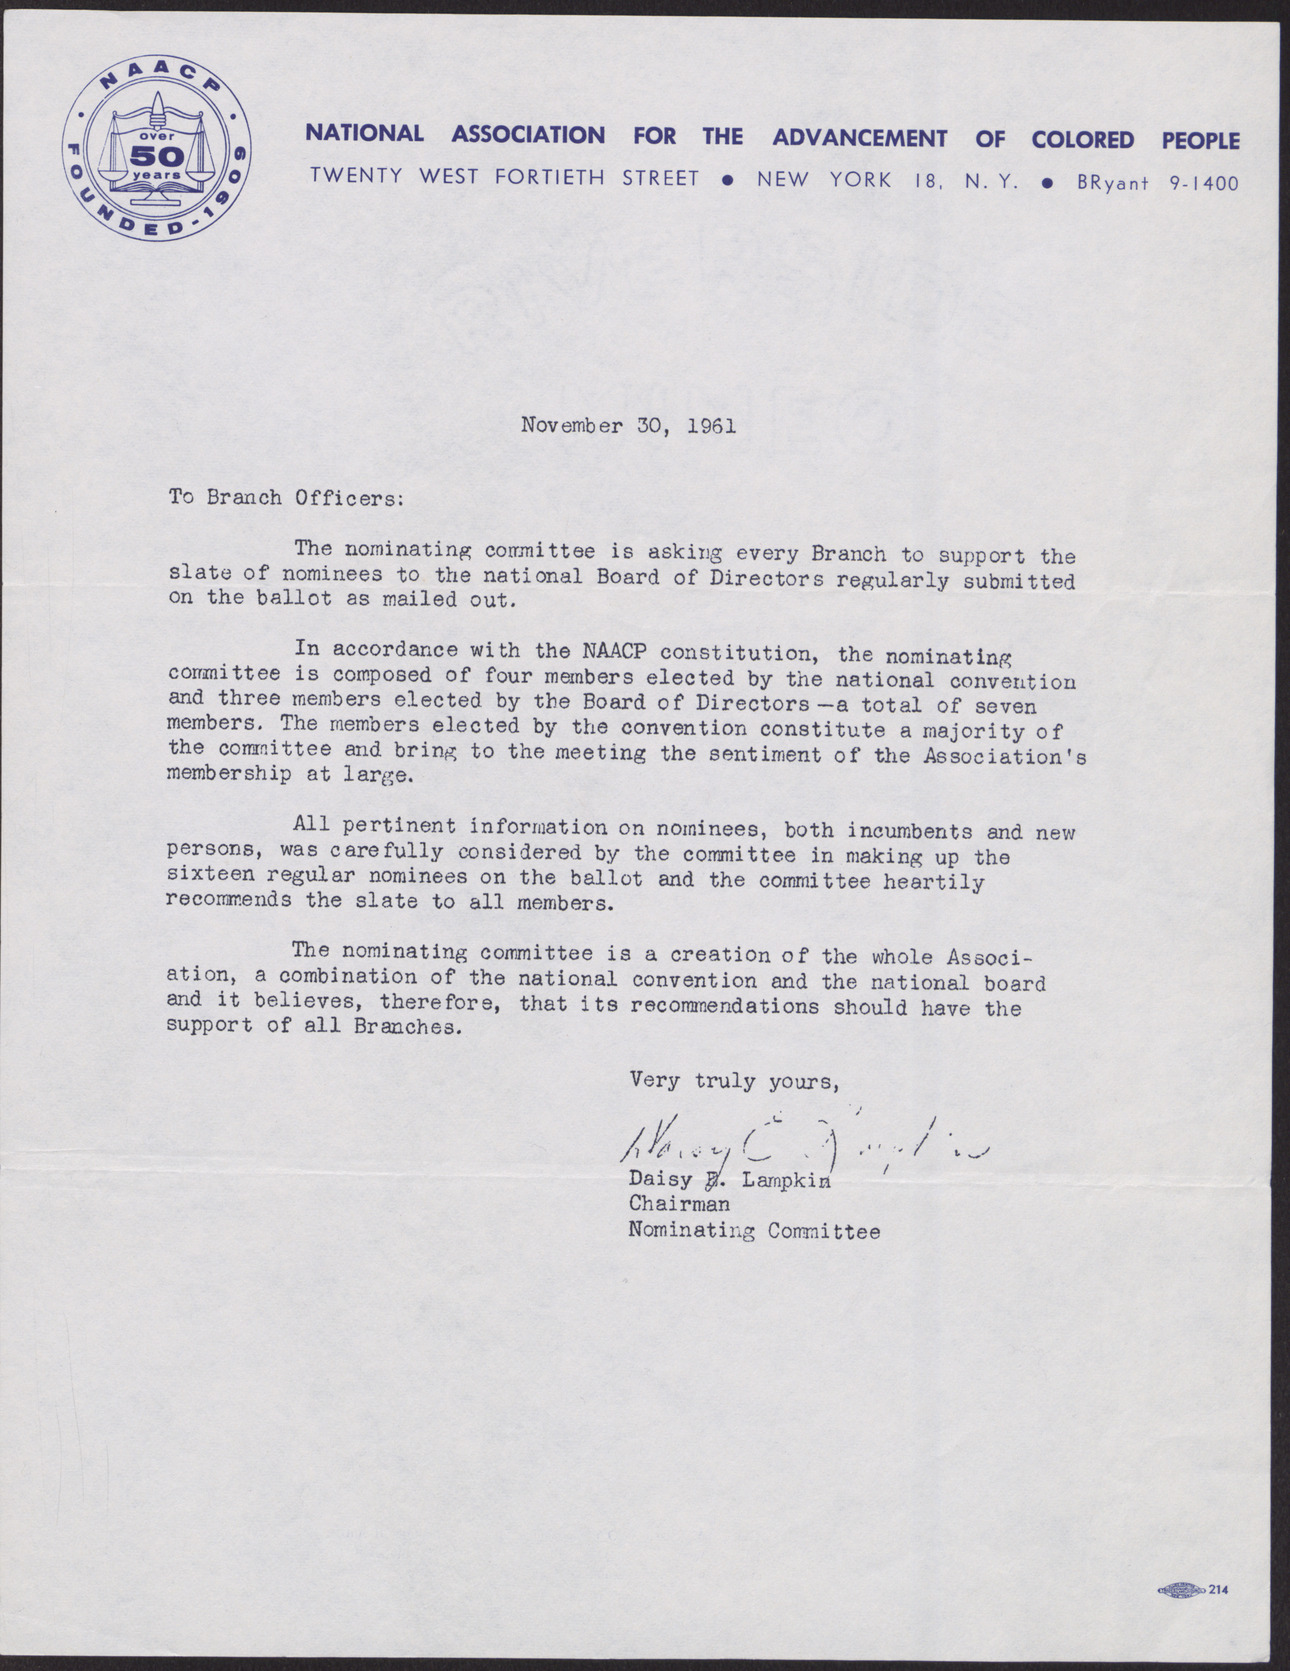 Letter to [unnamed] NAACP Branch Officers from Daisy E. Lampkin, November 30, 1961